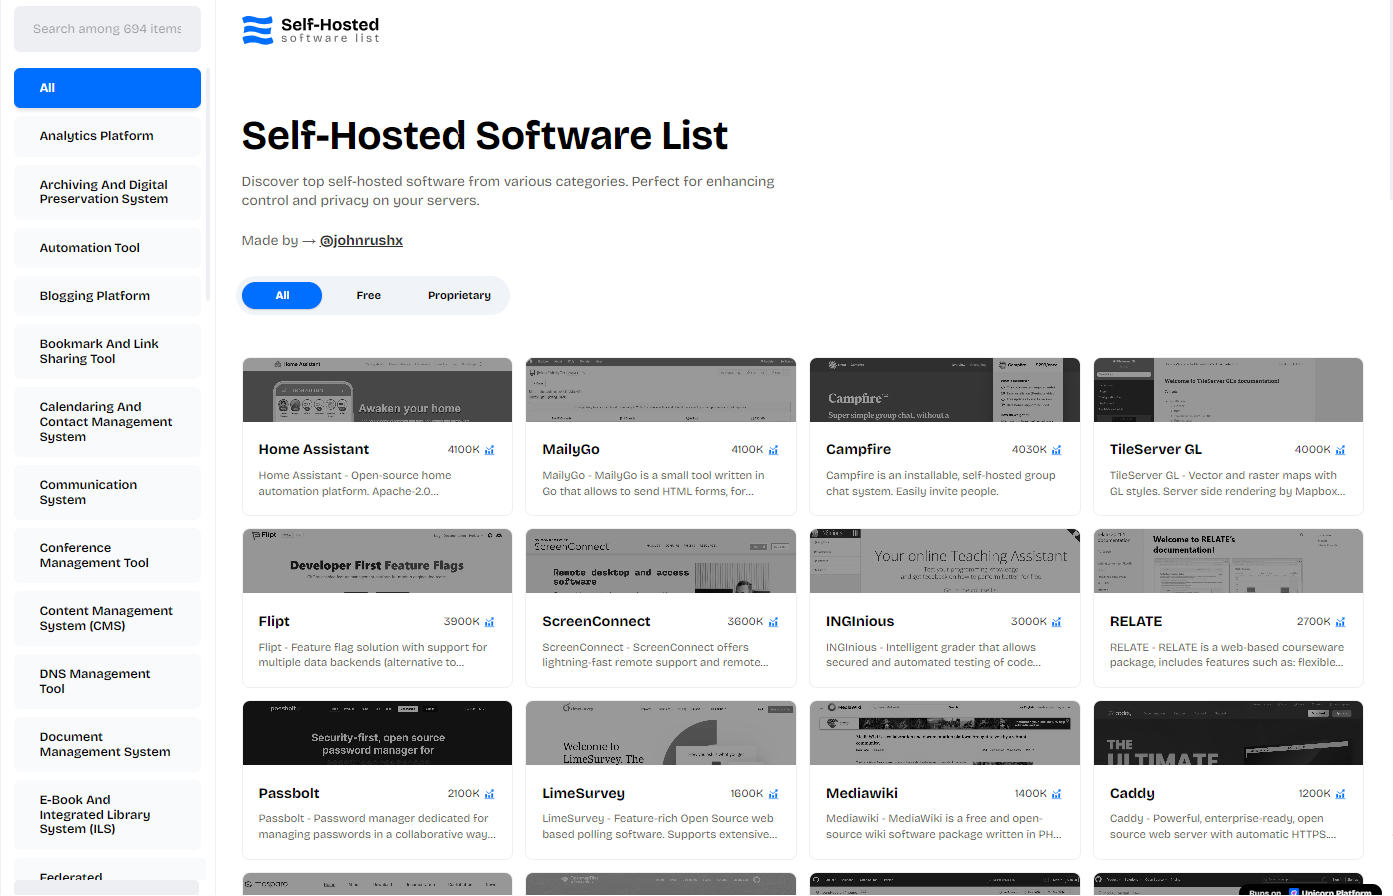 Self-Hosted Software List cover